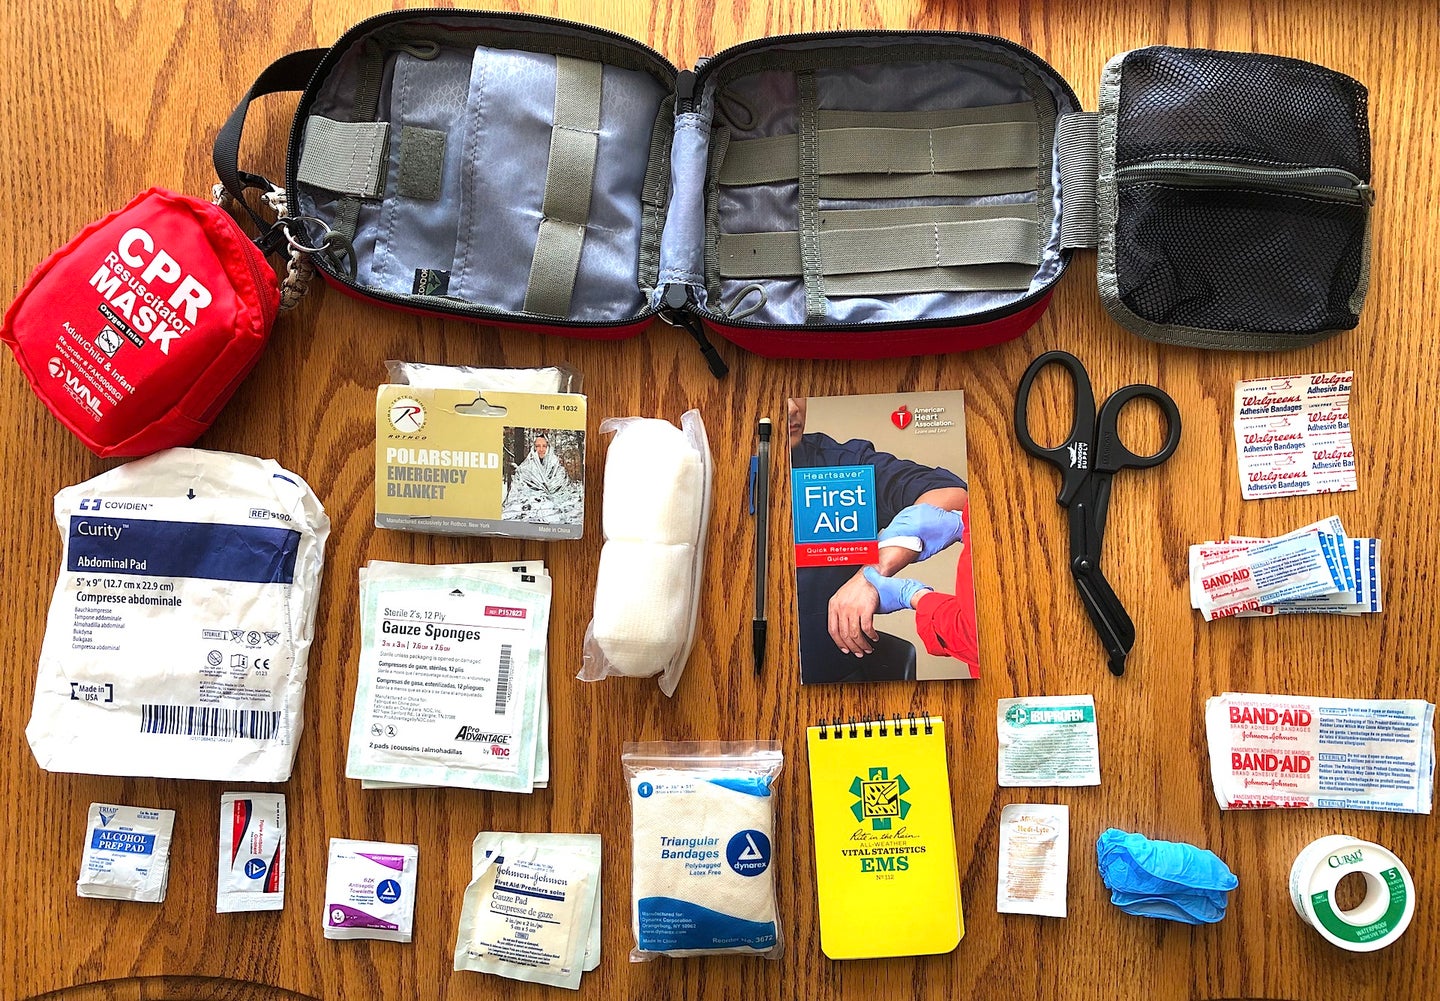 A homemade first aid kit.